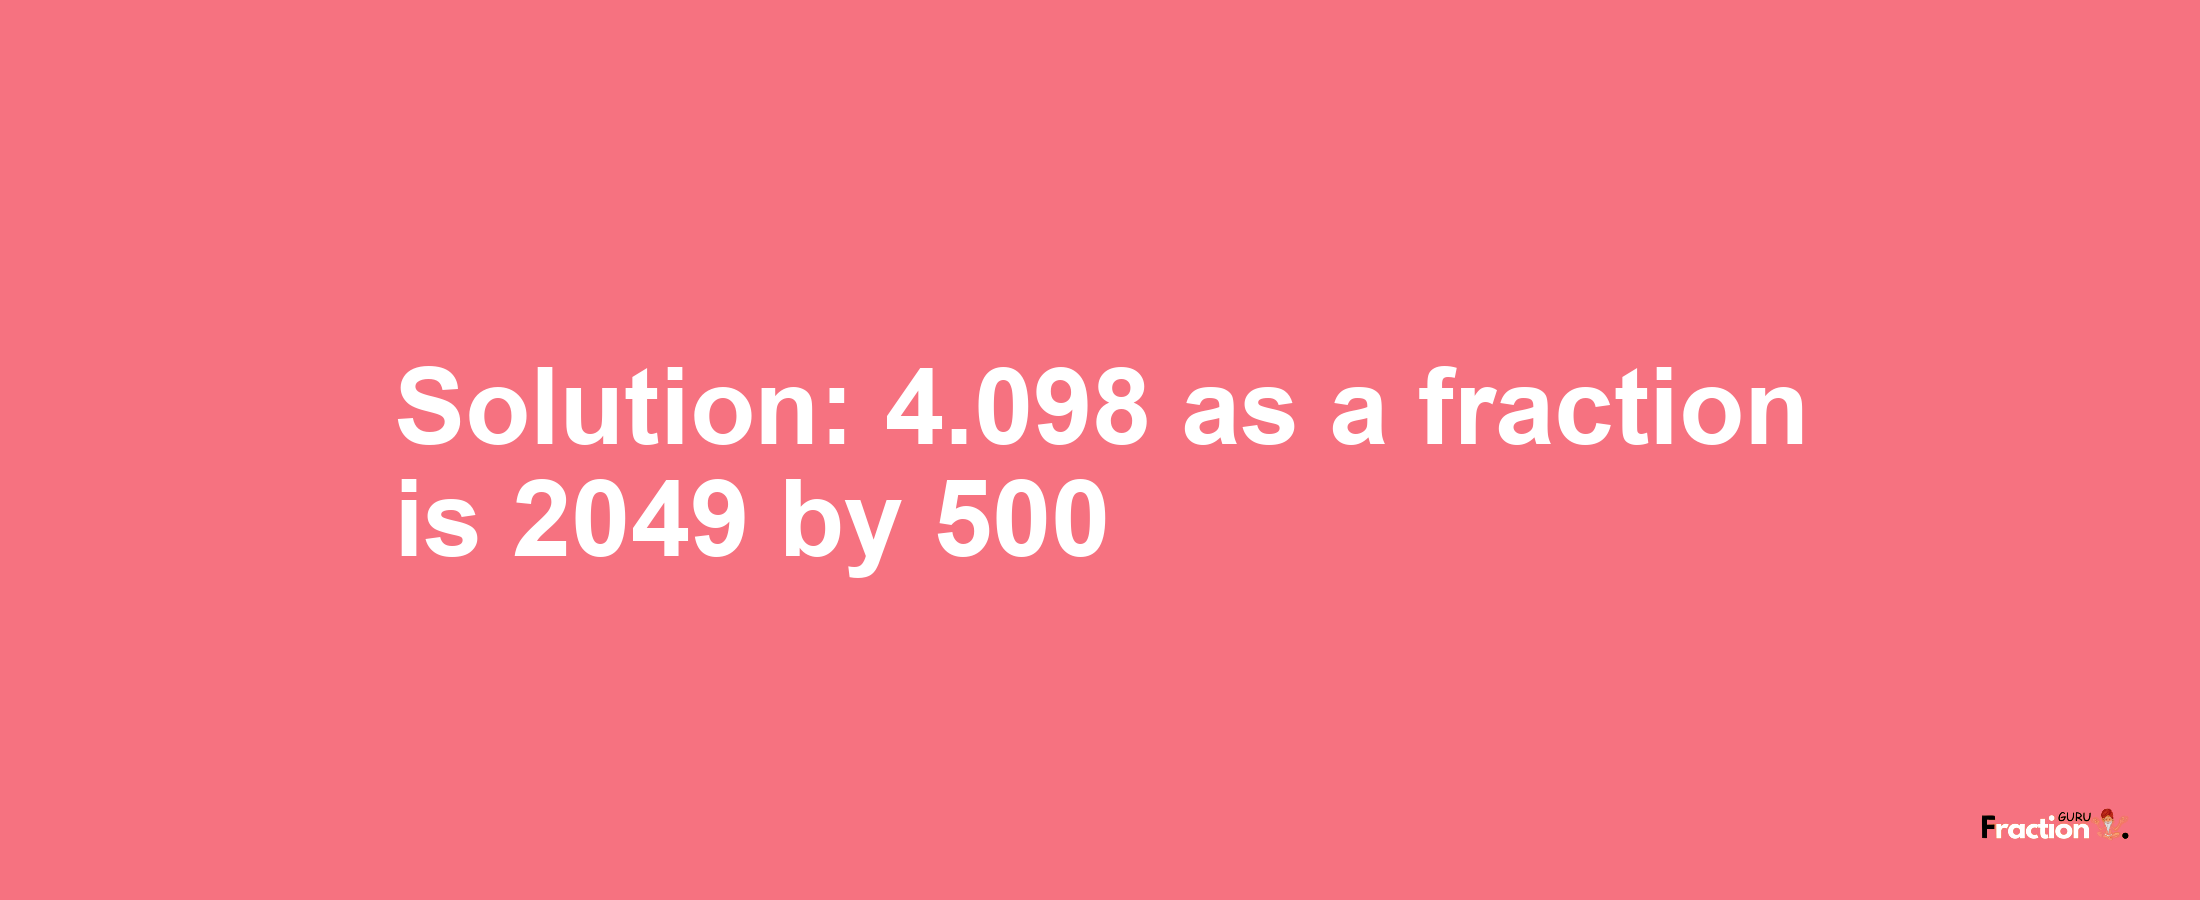 Solution:4.098 as a fraction is 2049/500